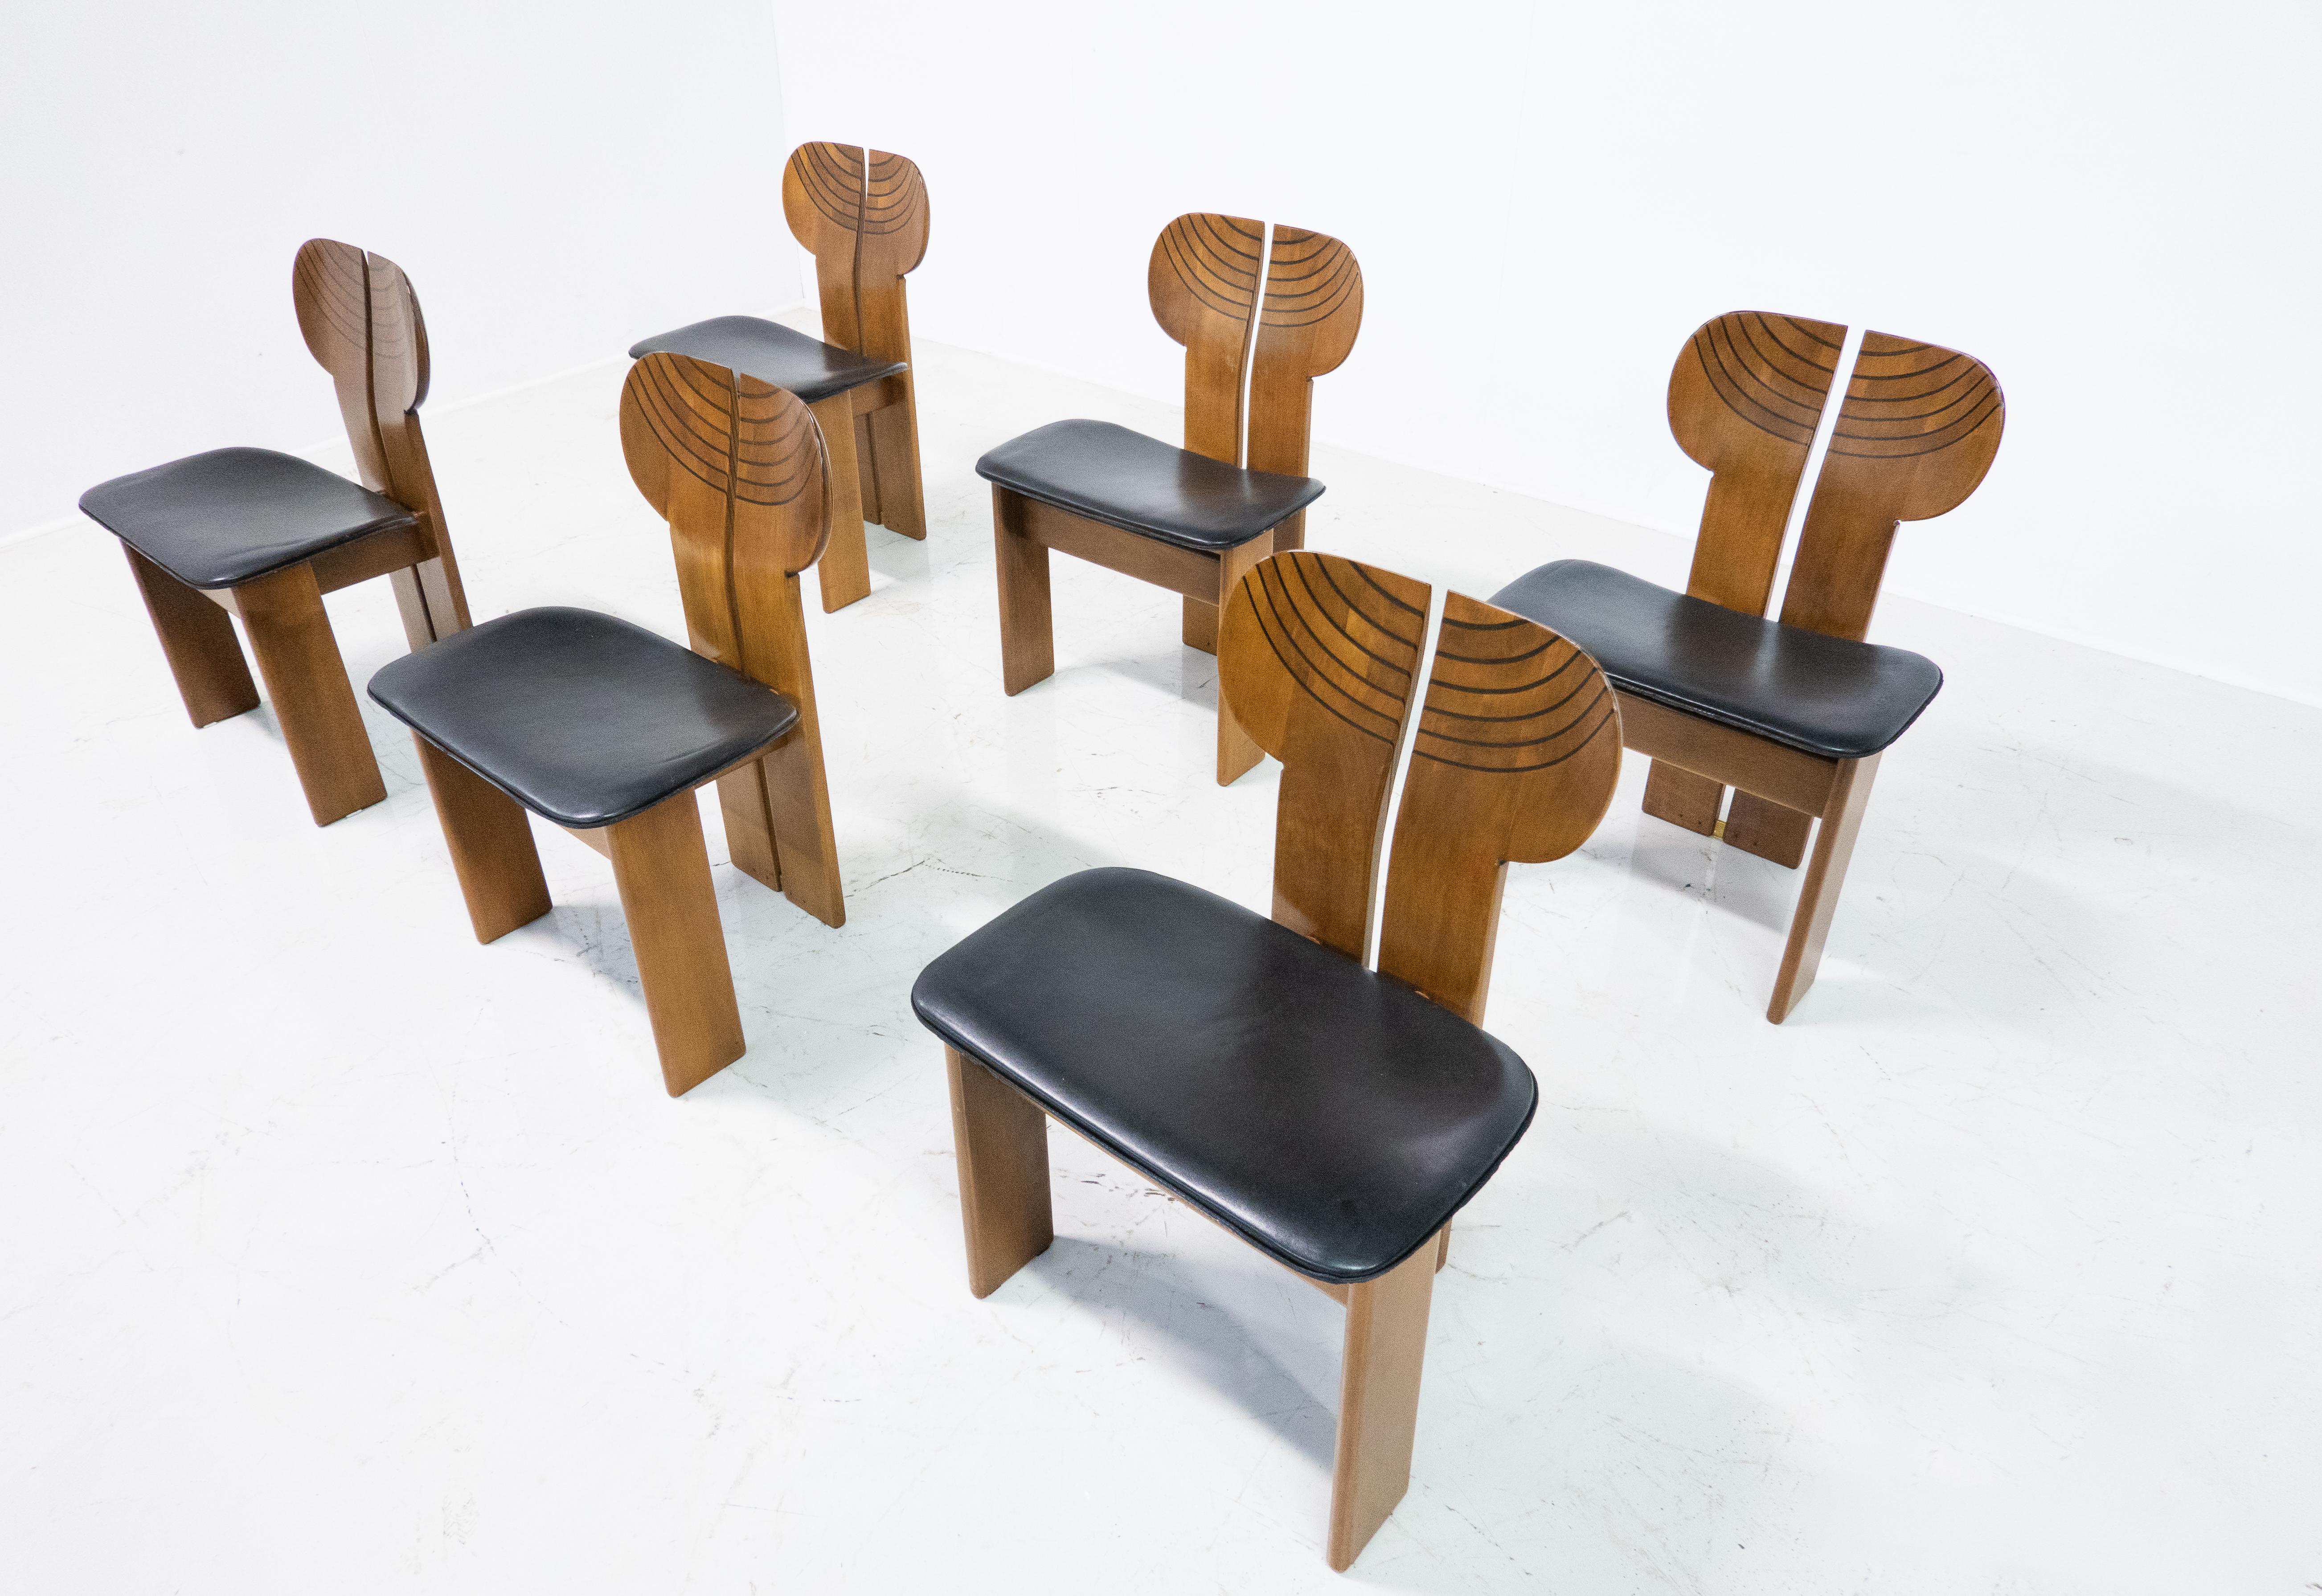 Late 20th Century Mid-Century Modern Set of 6 Africa Chairs by Afra & Tobia Scarpa for Maxalto For Sale